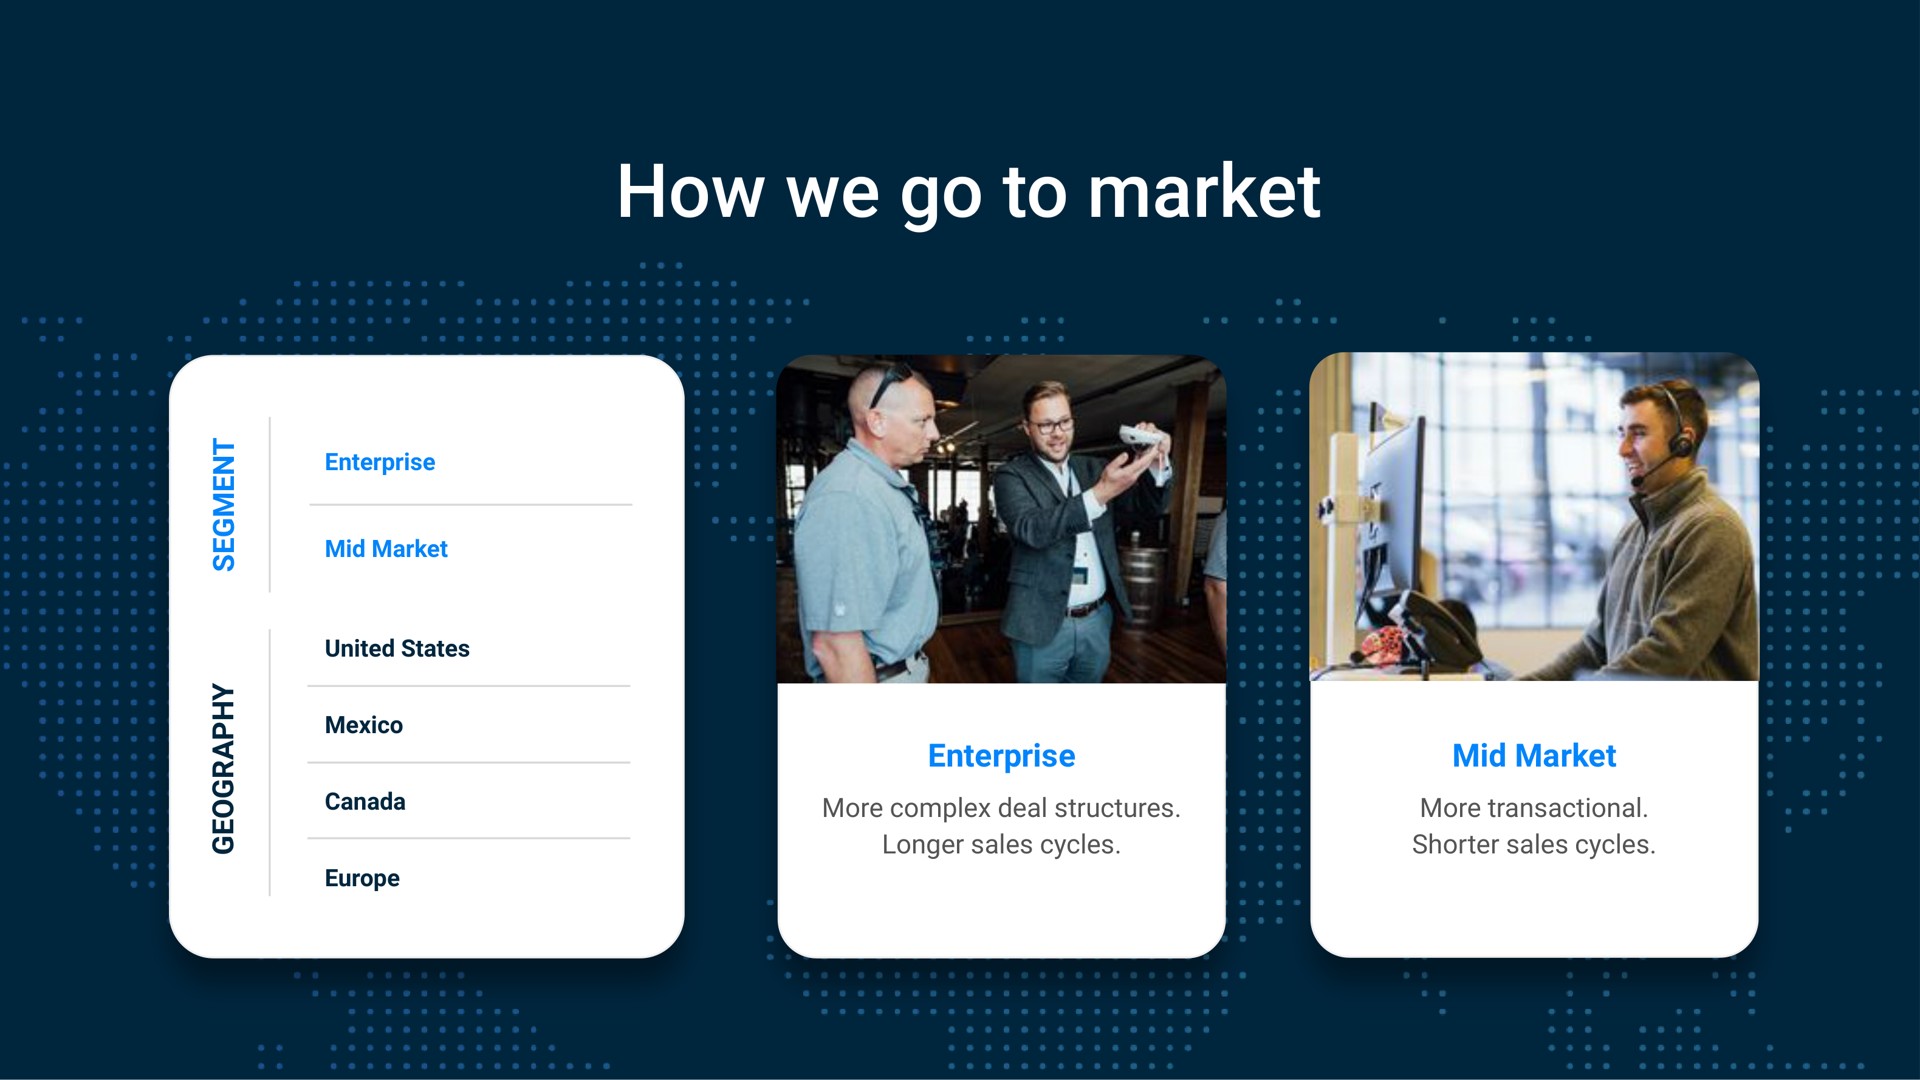 how we go to market a enterprise mid market united states canada enterprise more complex deal structures longer sales cycles mid market more transactional shorter sales cycles | Samsara